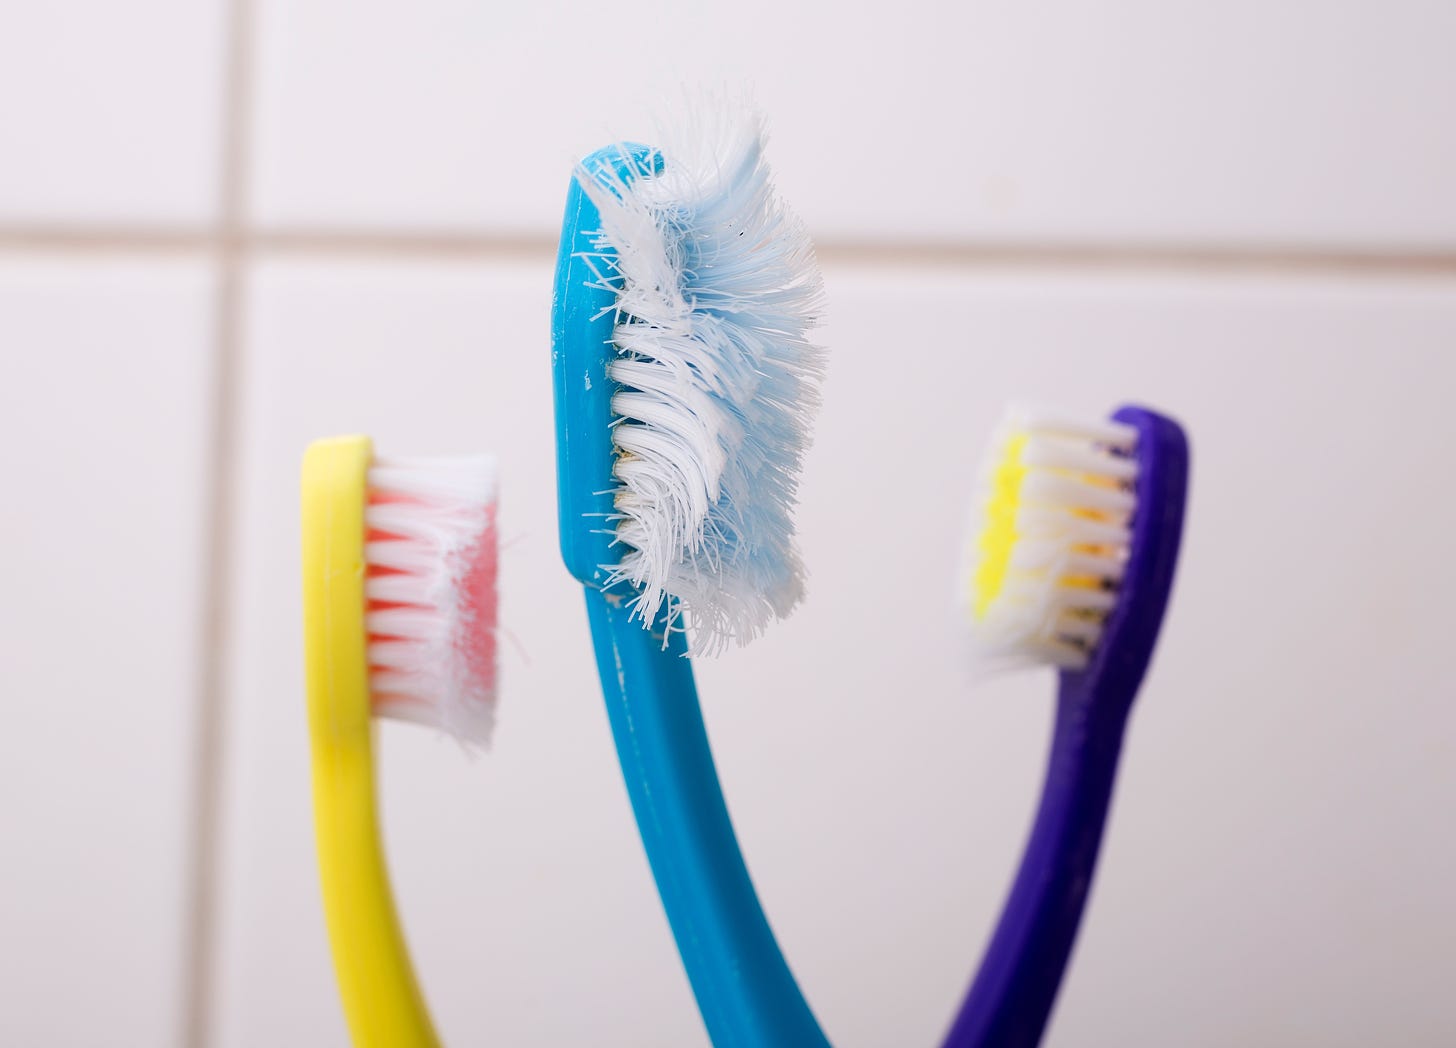 A frayed toothbrush surrounded by two children's toothbrushes.